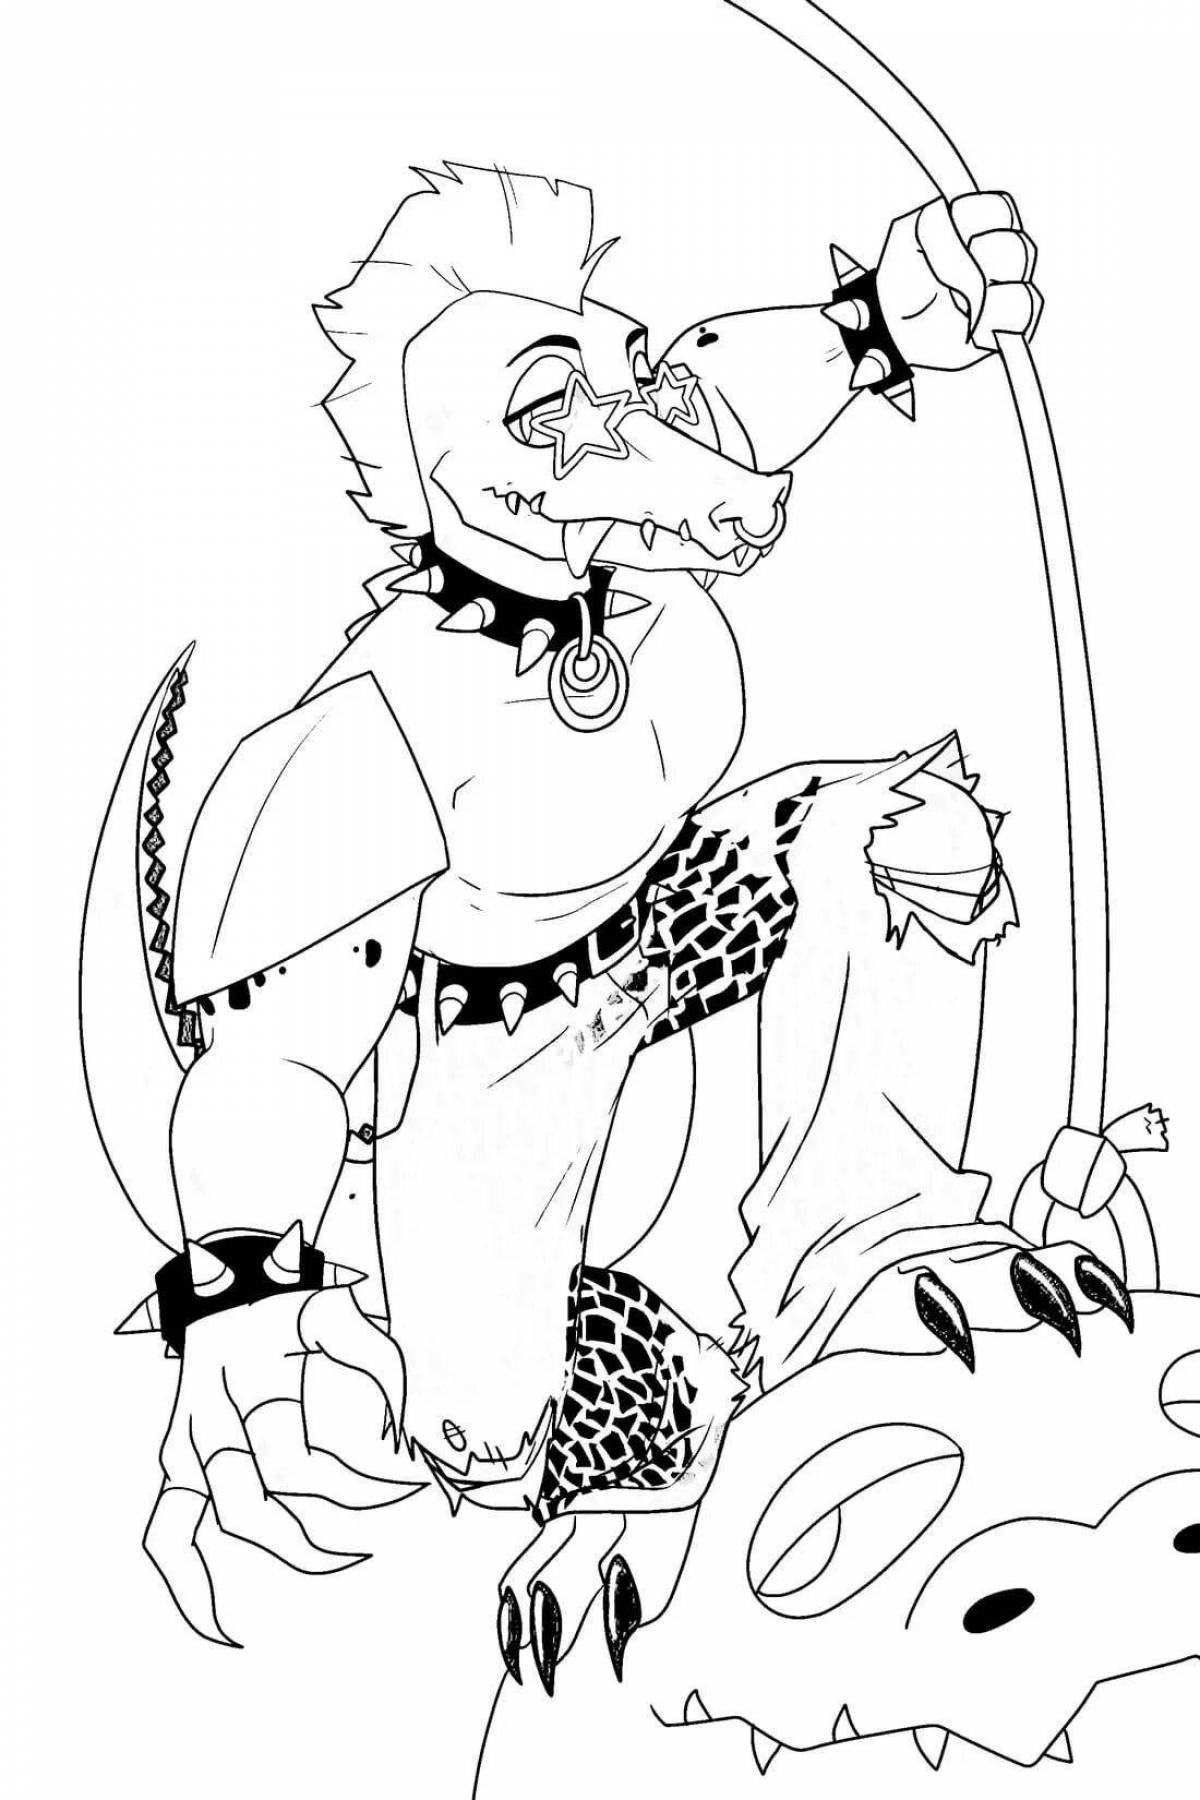 Monty the king alligator coloring page